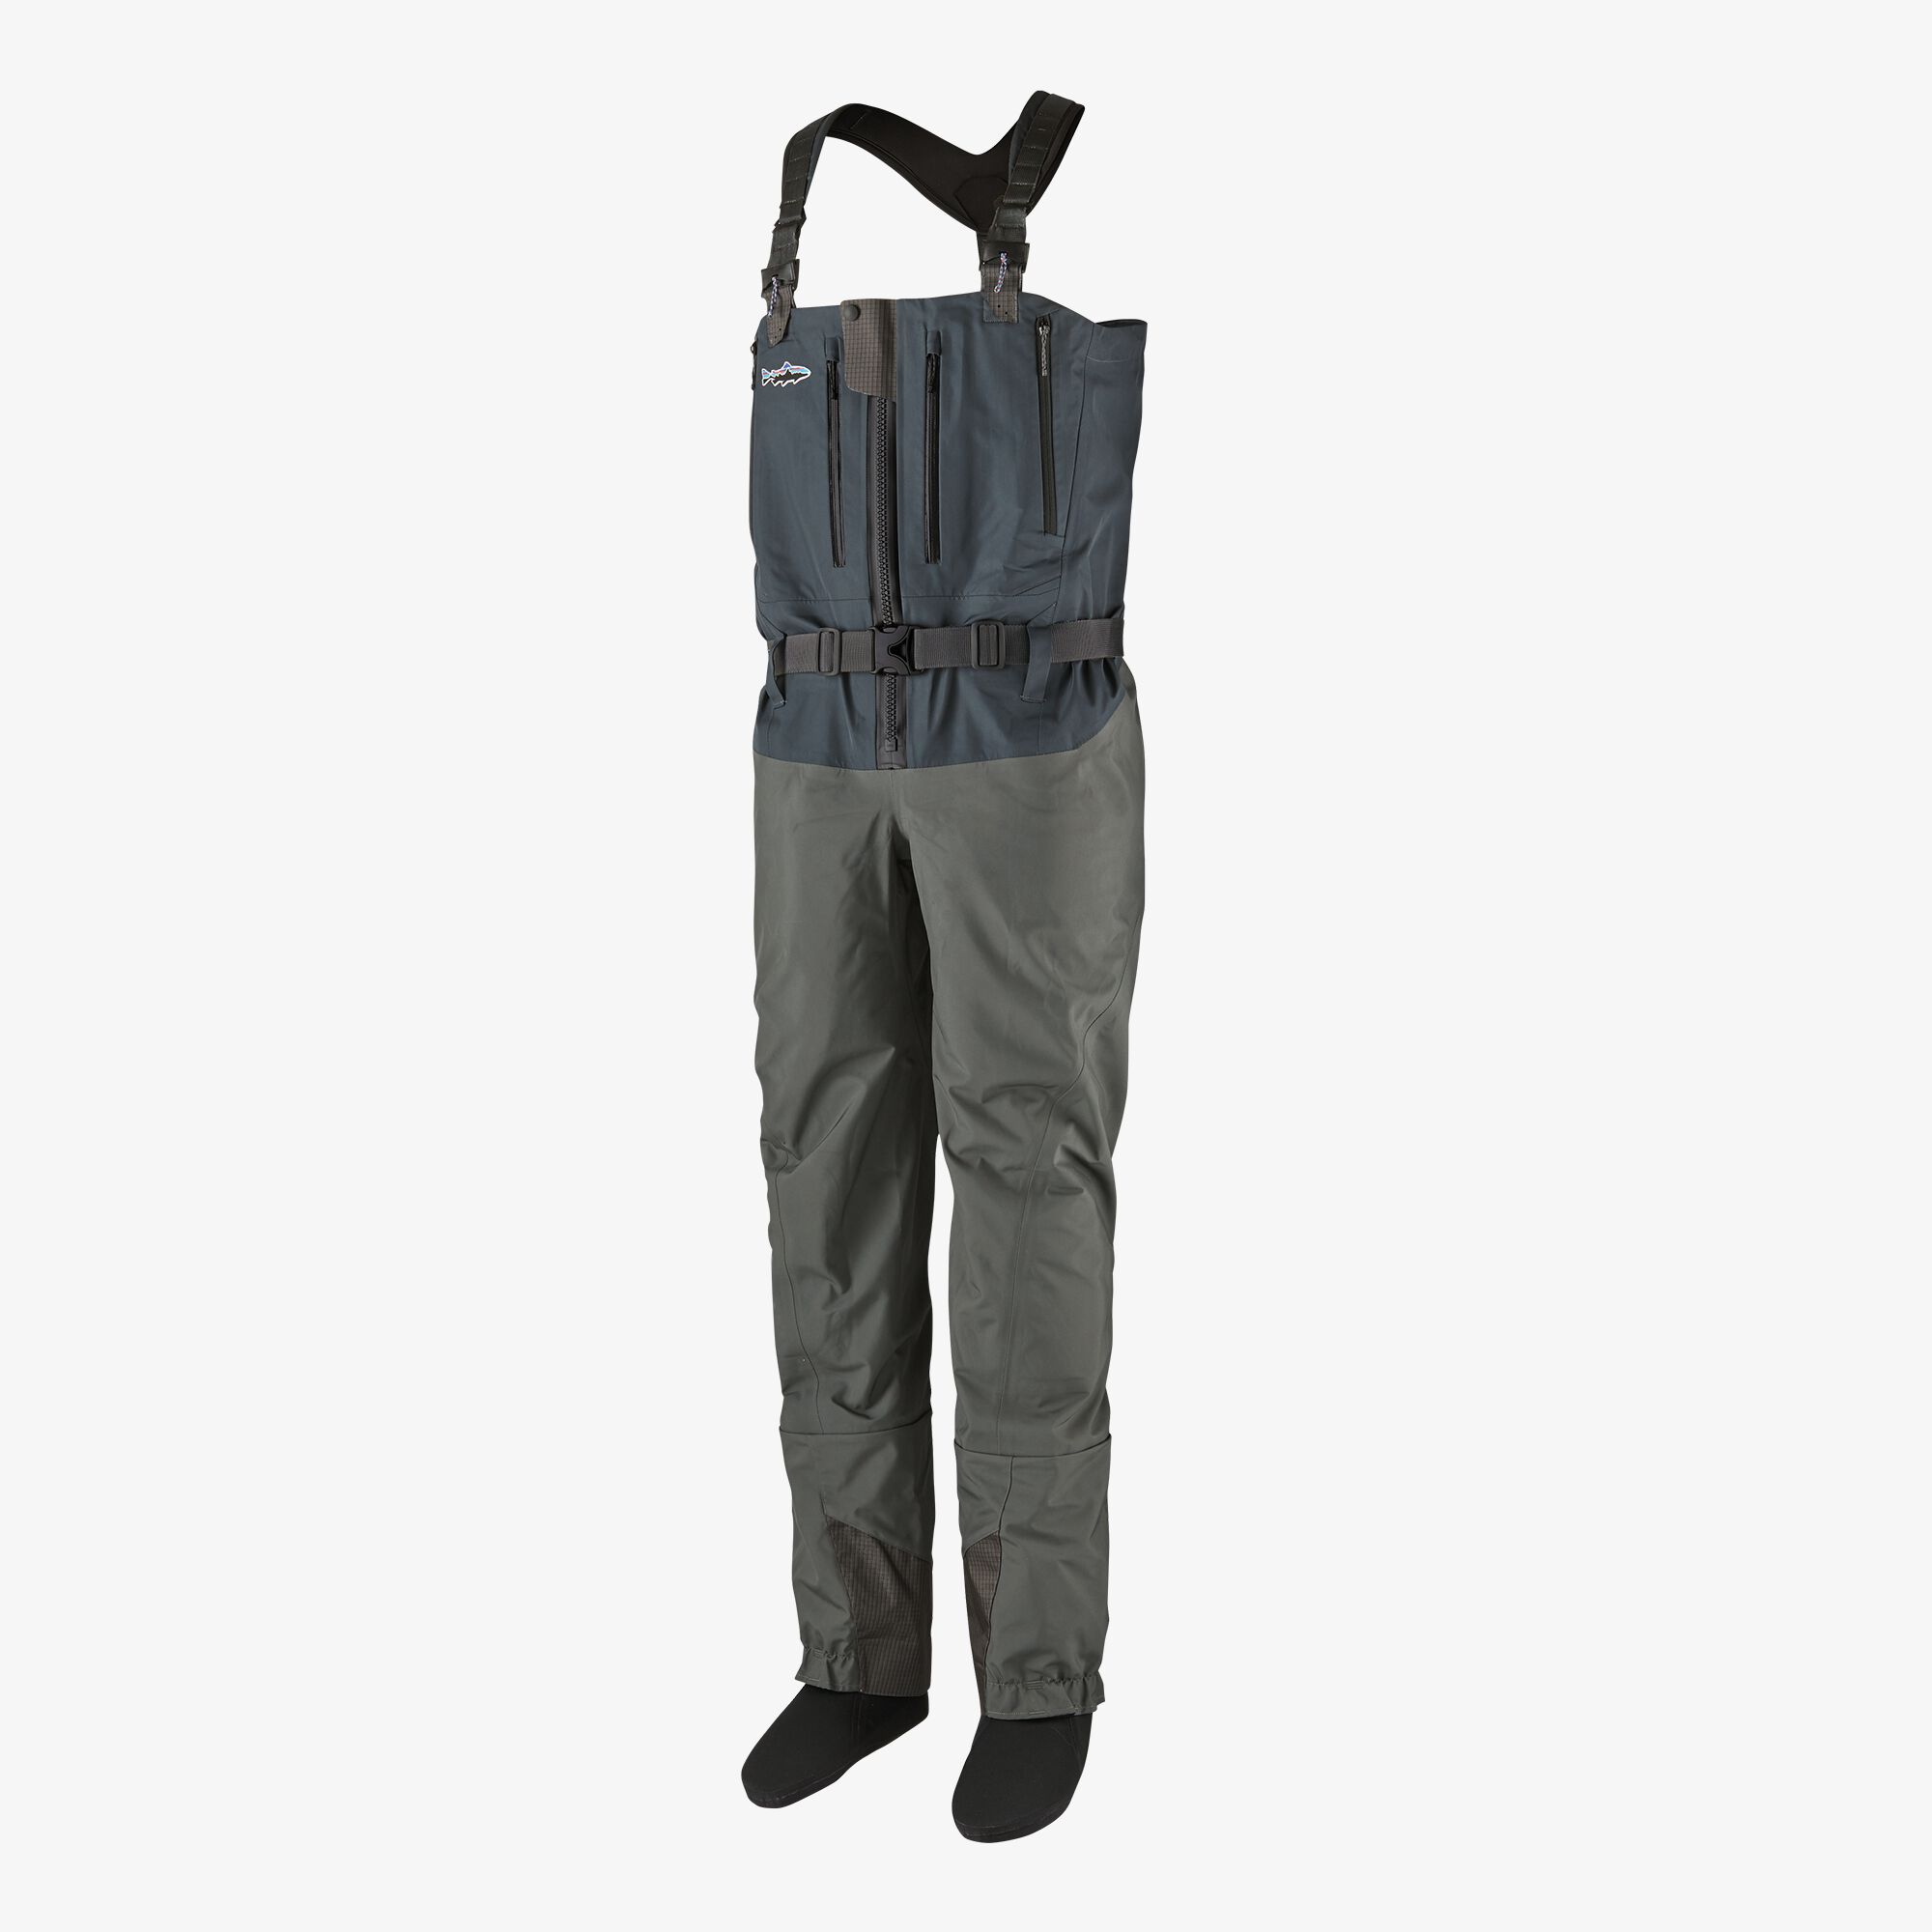 PATAGONIA SWIFTCURRENT EXPEDITION ZIP-FRONT WADER - FORGE GREY - XSM